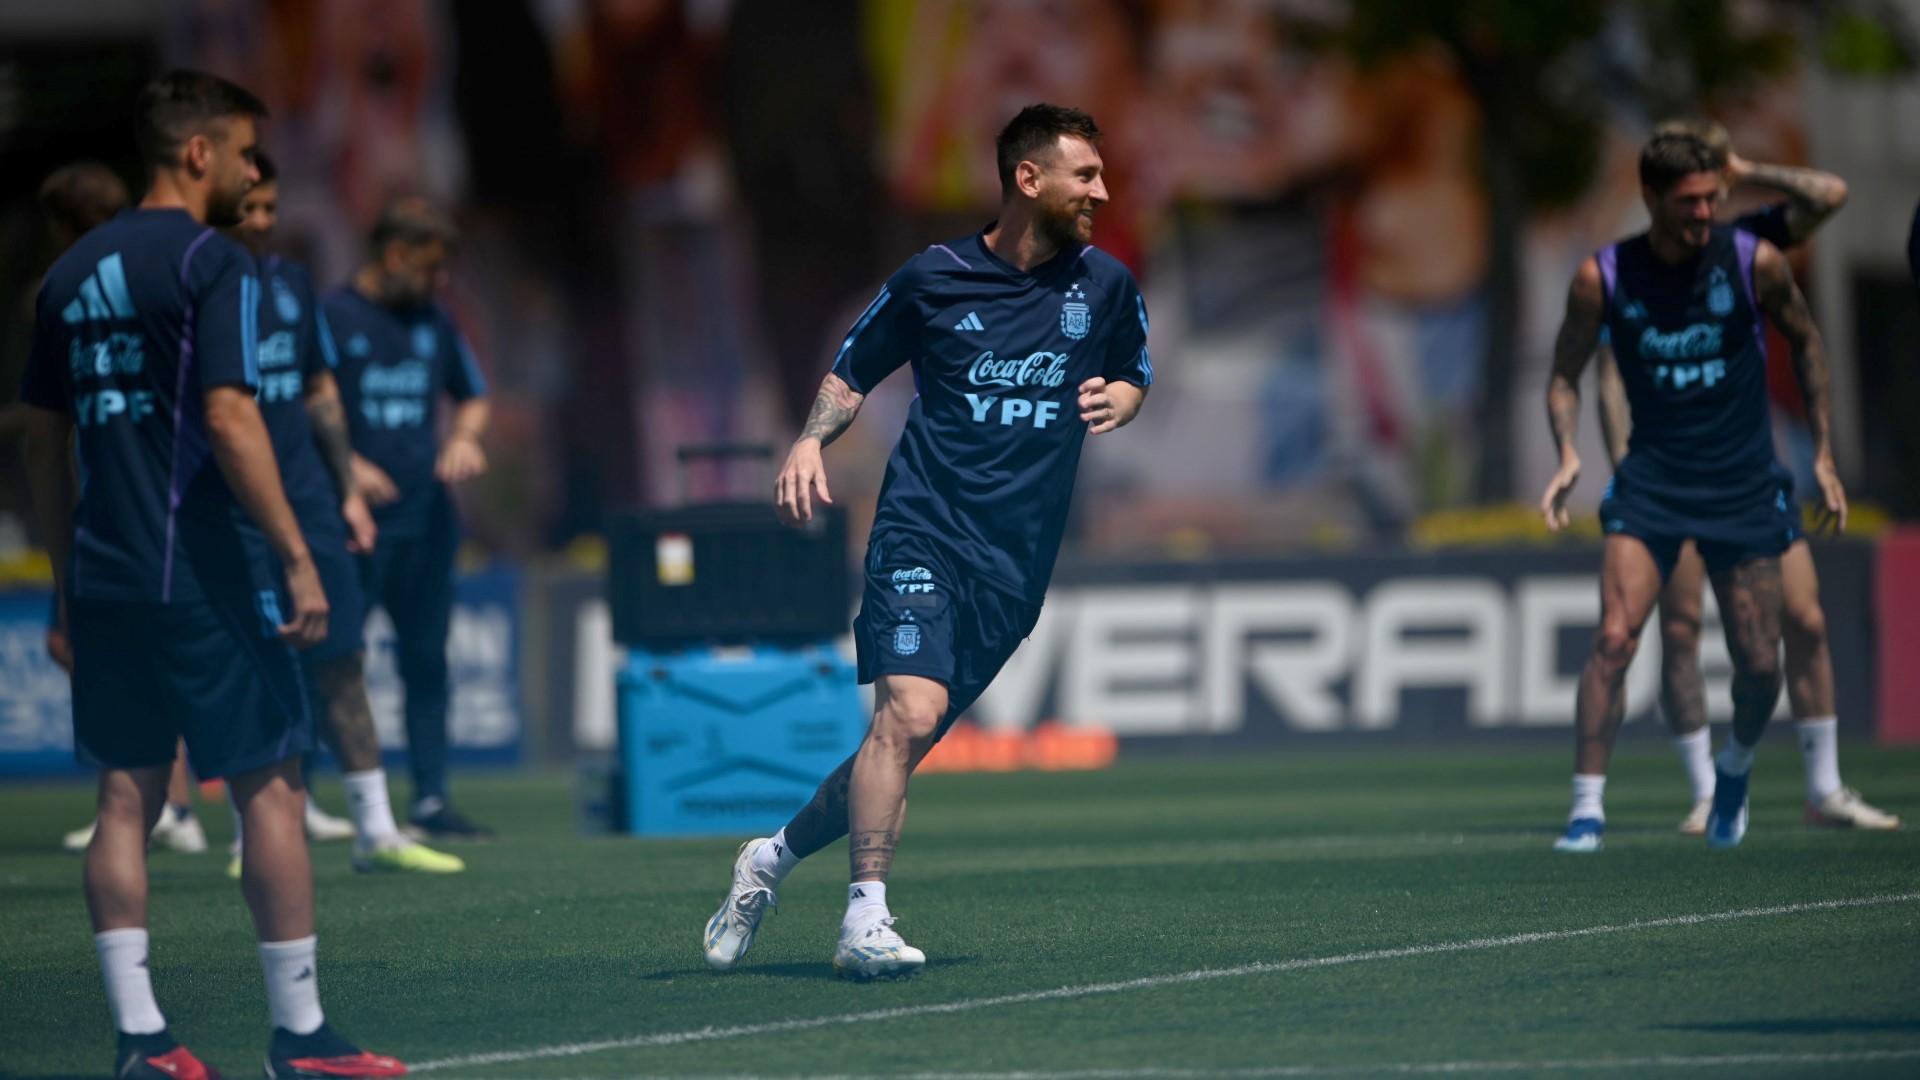 Messi, Argentina national football team to play Peru amid heavy security presence